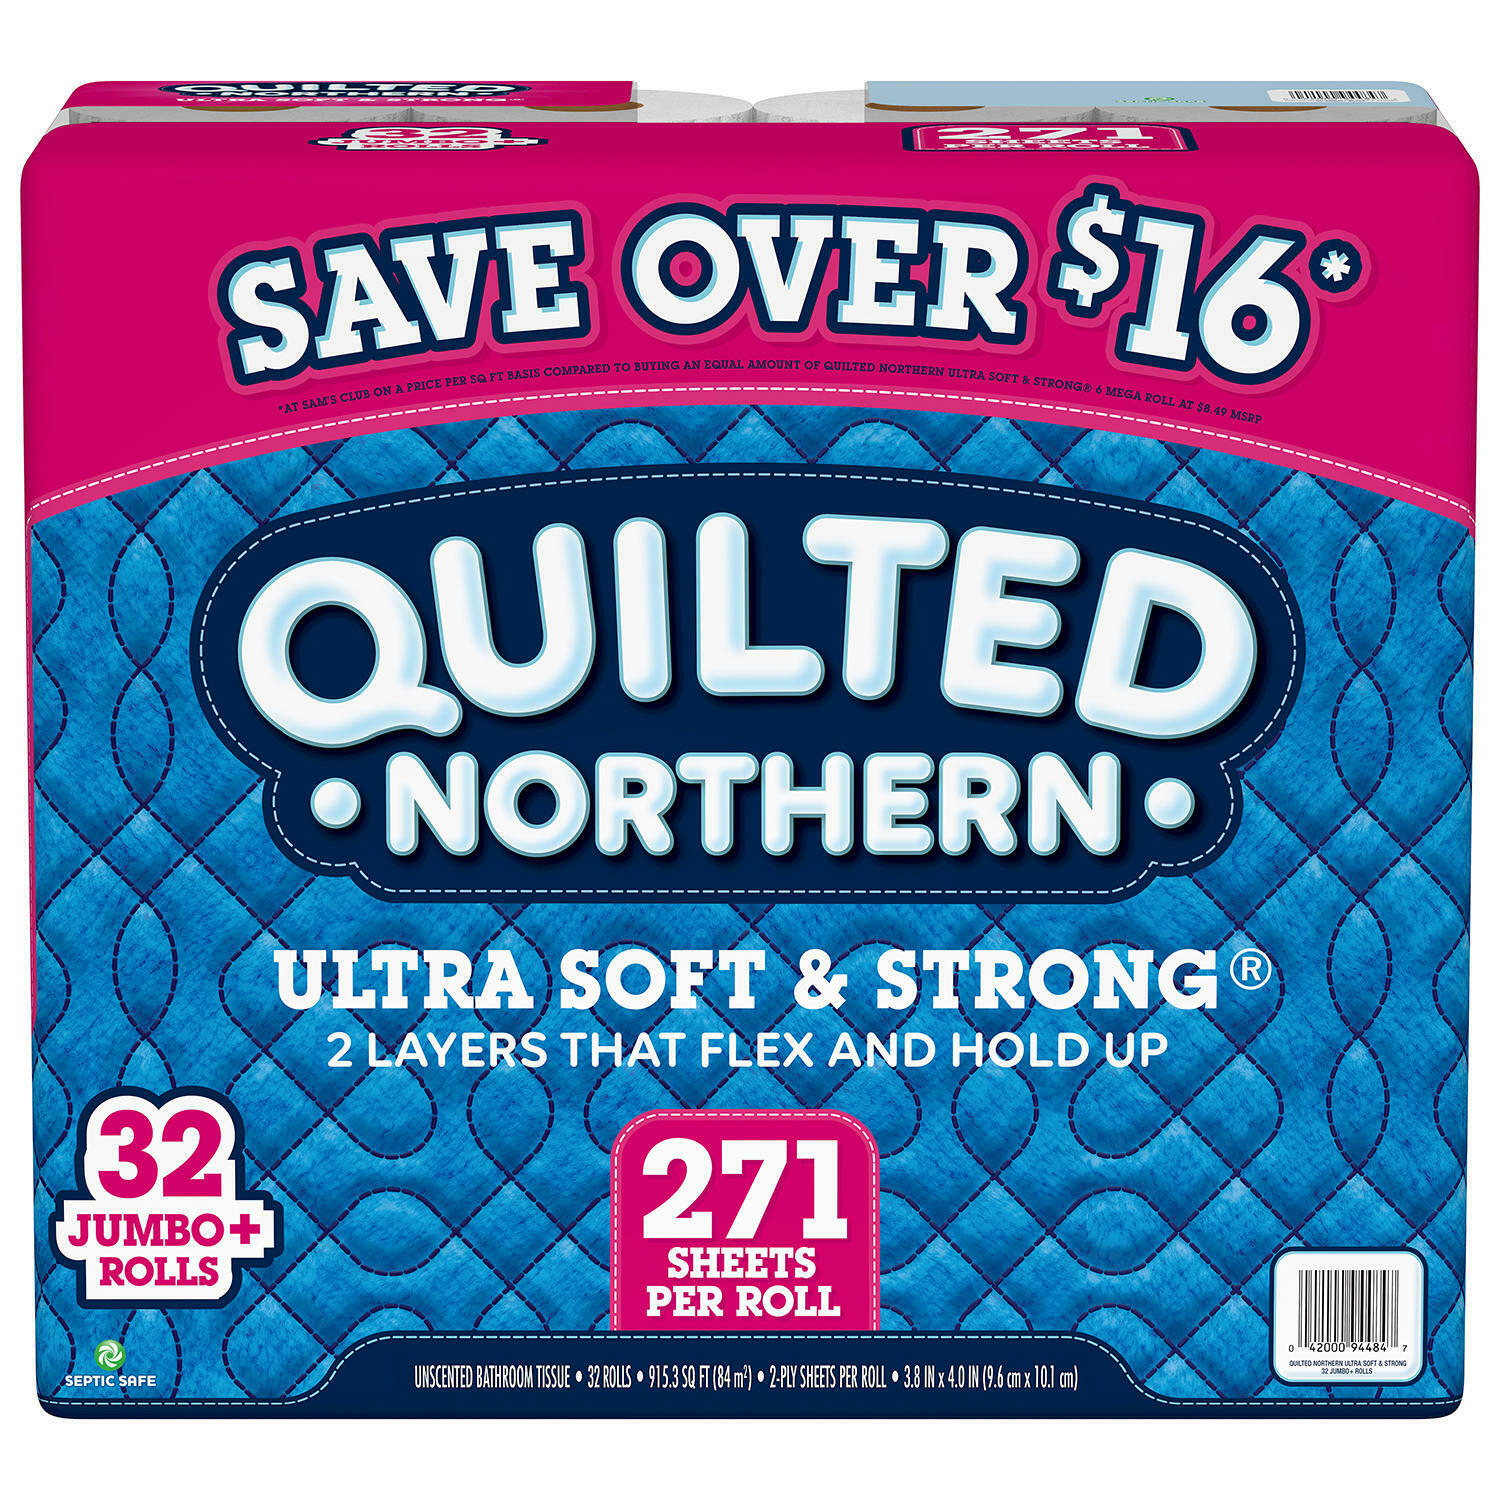 Quilted Northern Ultra Soft and Strong Toilet Paper(271 sheets/roll, 32 ct.)